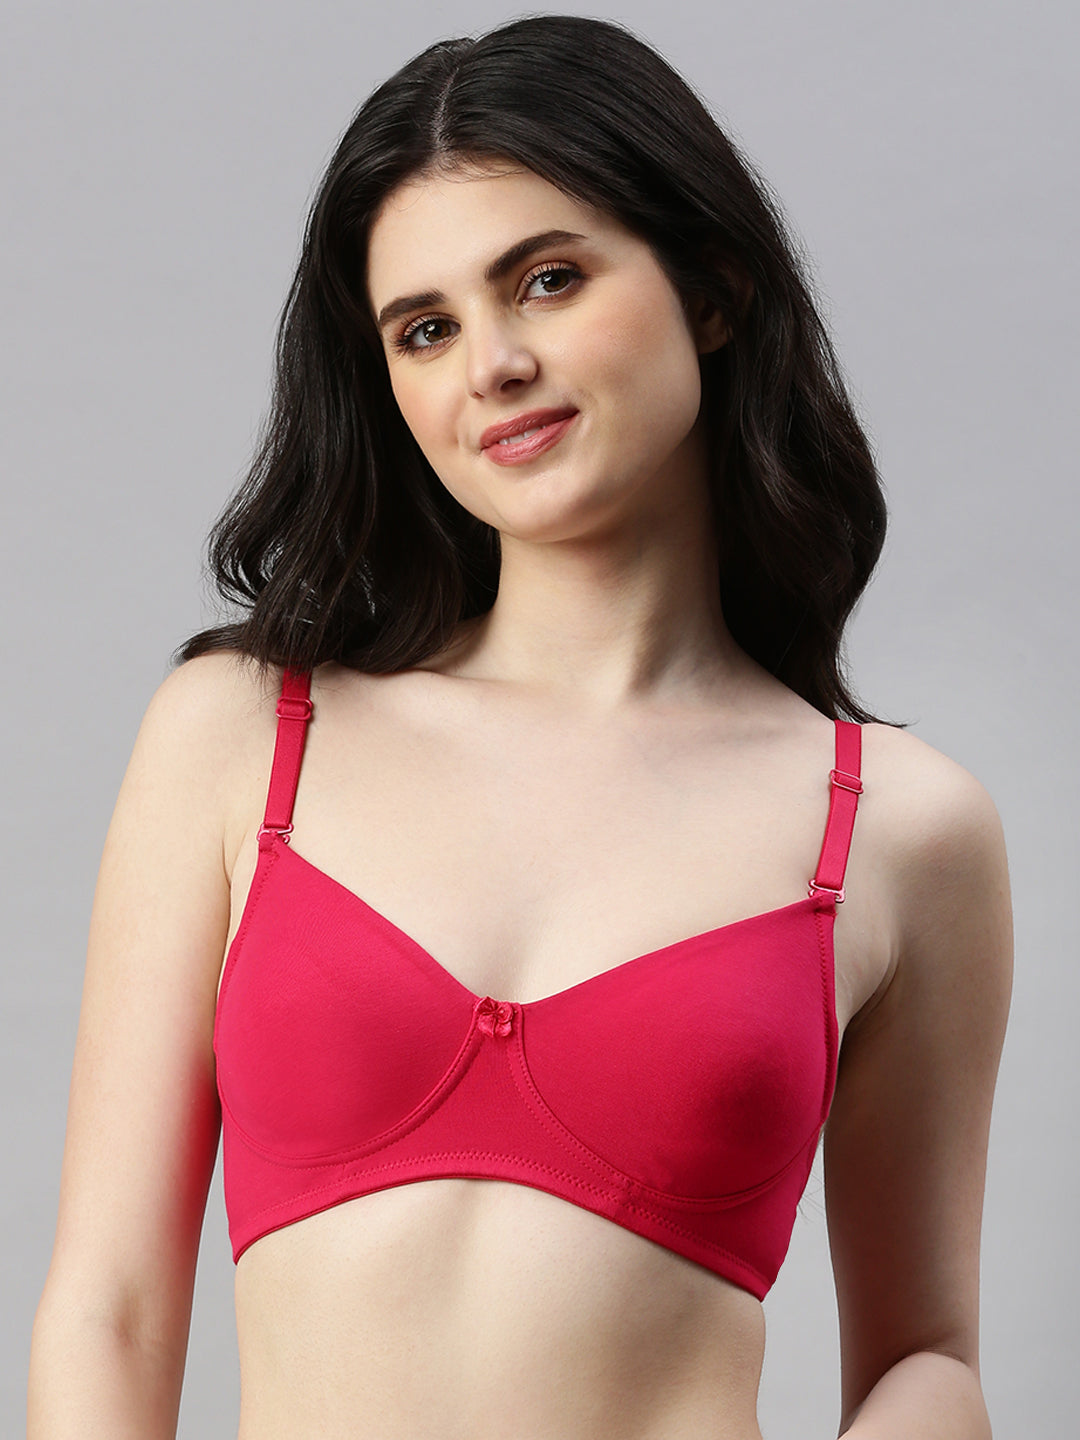 Prisma Tee Fit Moulded Concealed Kurthi/T-Shirt Bra - Strawberry